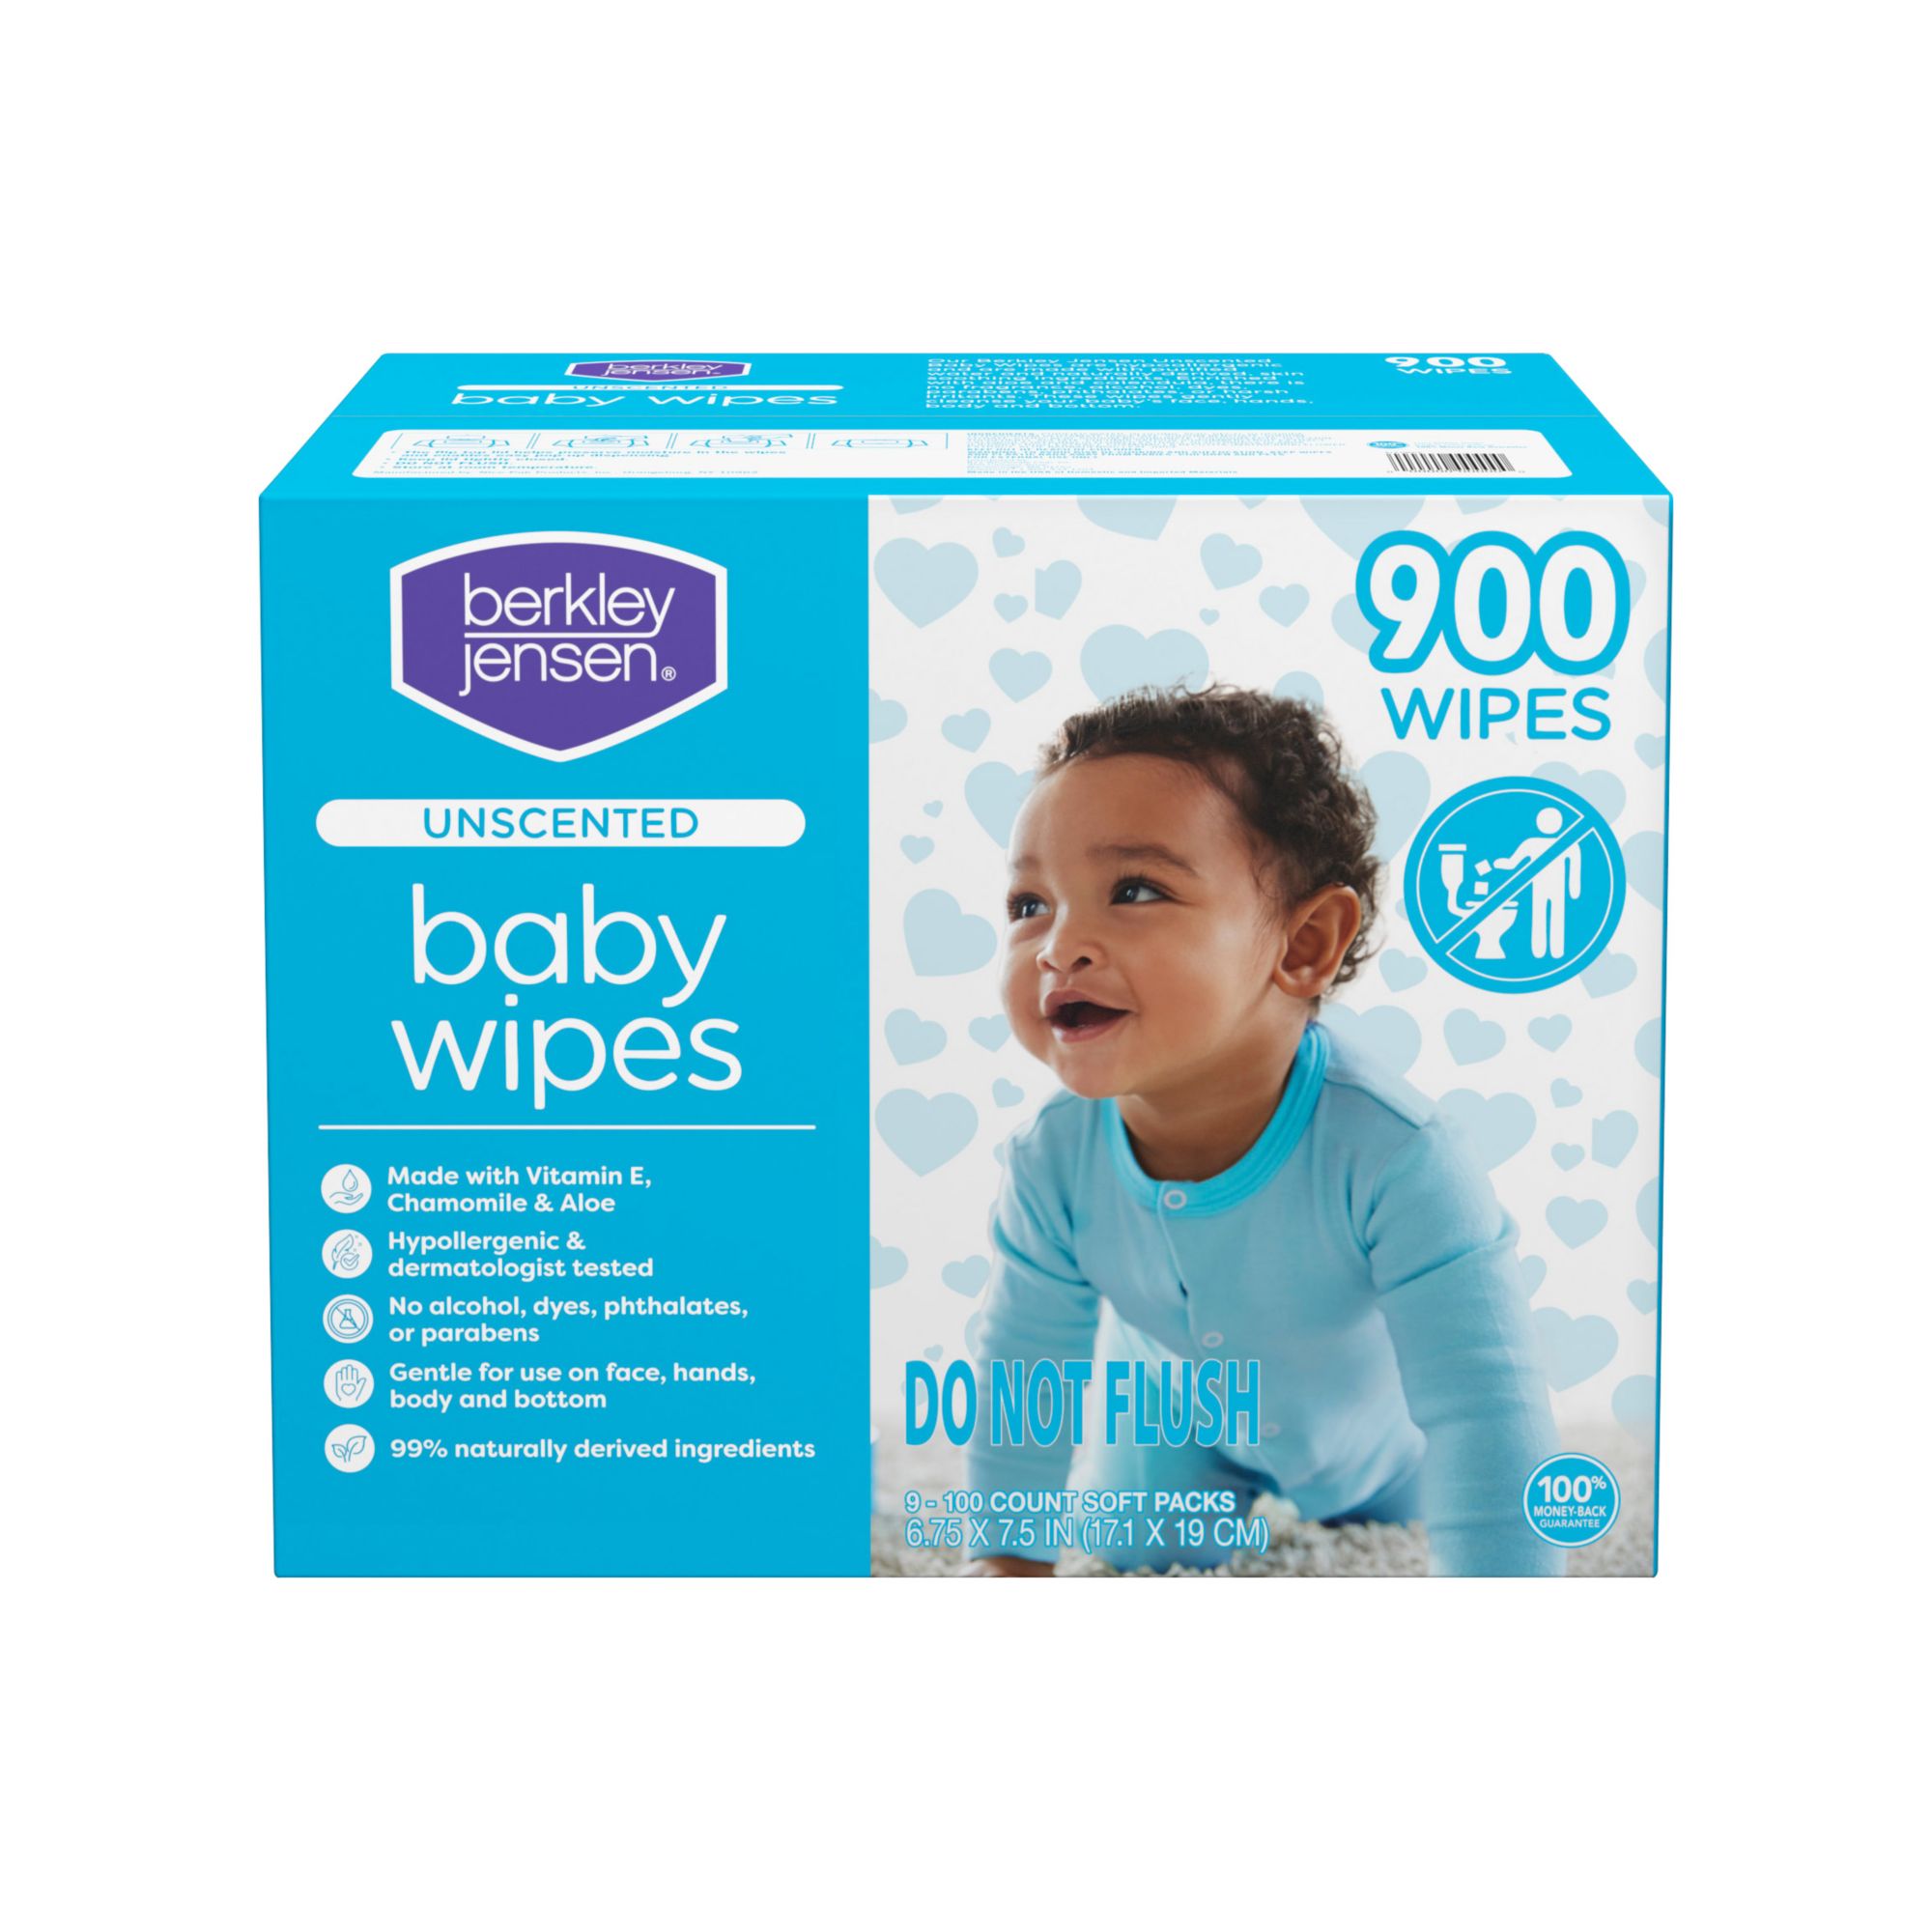 Diapers Pull On Cruisers 360° Fit Disposable Baby Diapers with Stretchy  Waistband, 64 Diapers - City Market